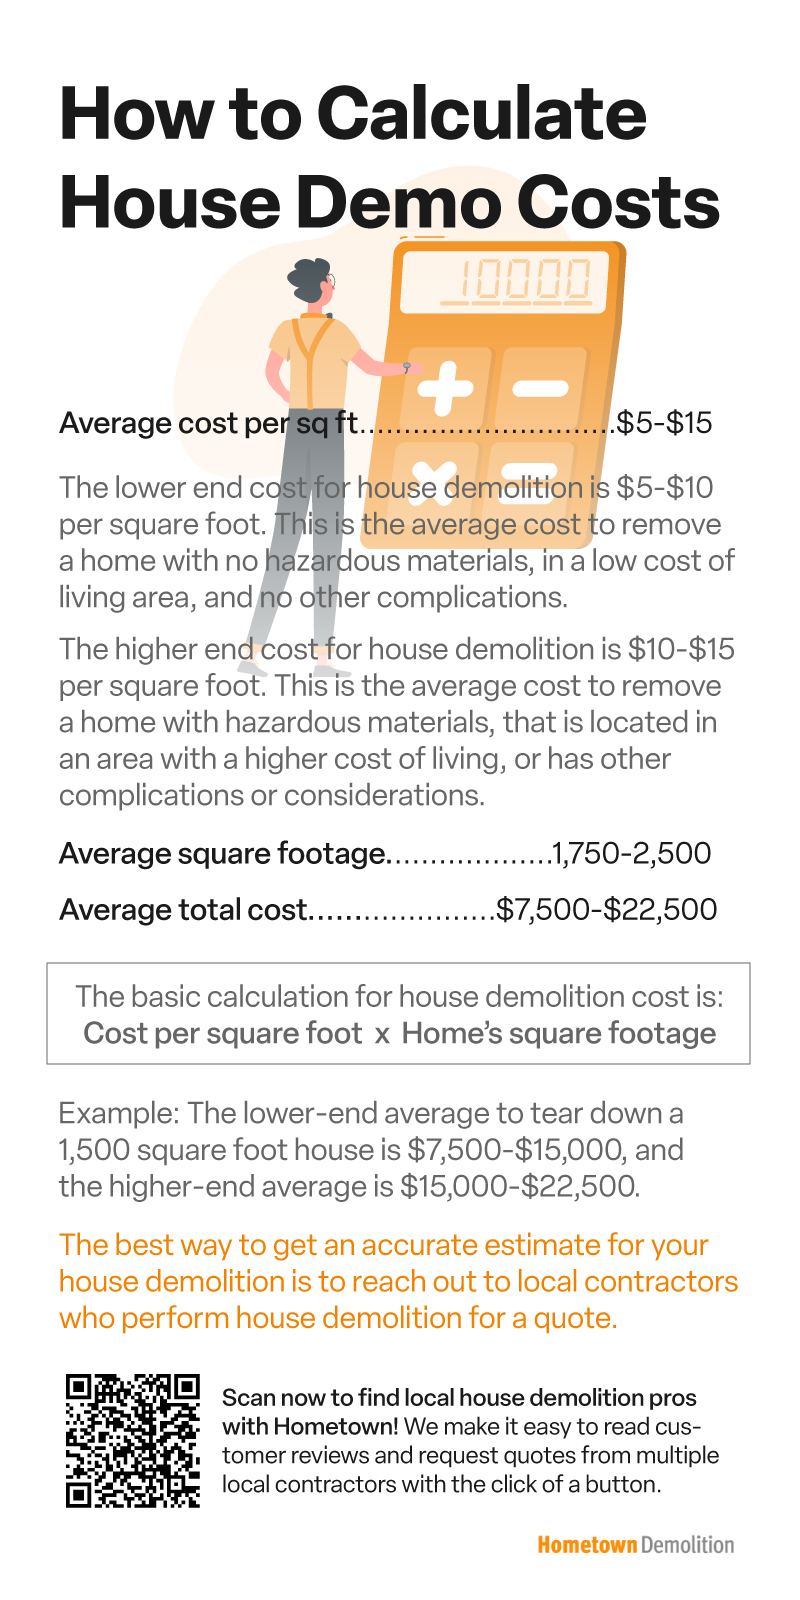 calculating house demolition costs infographic